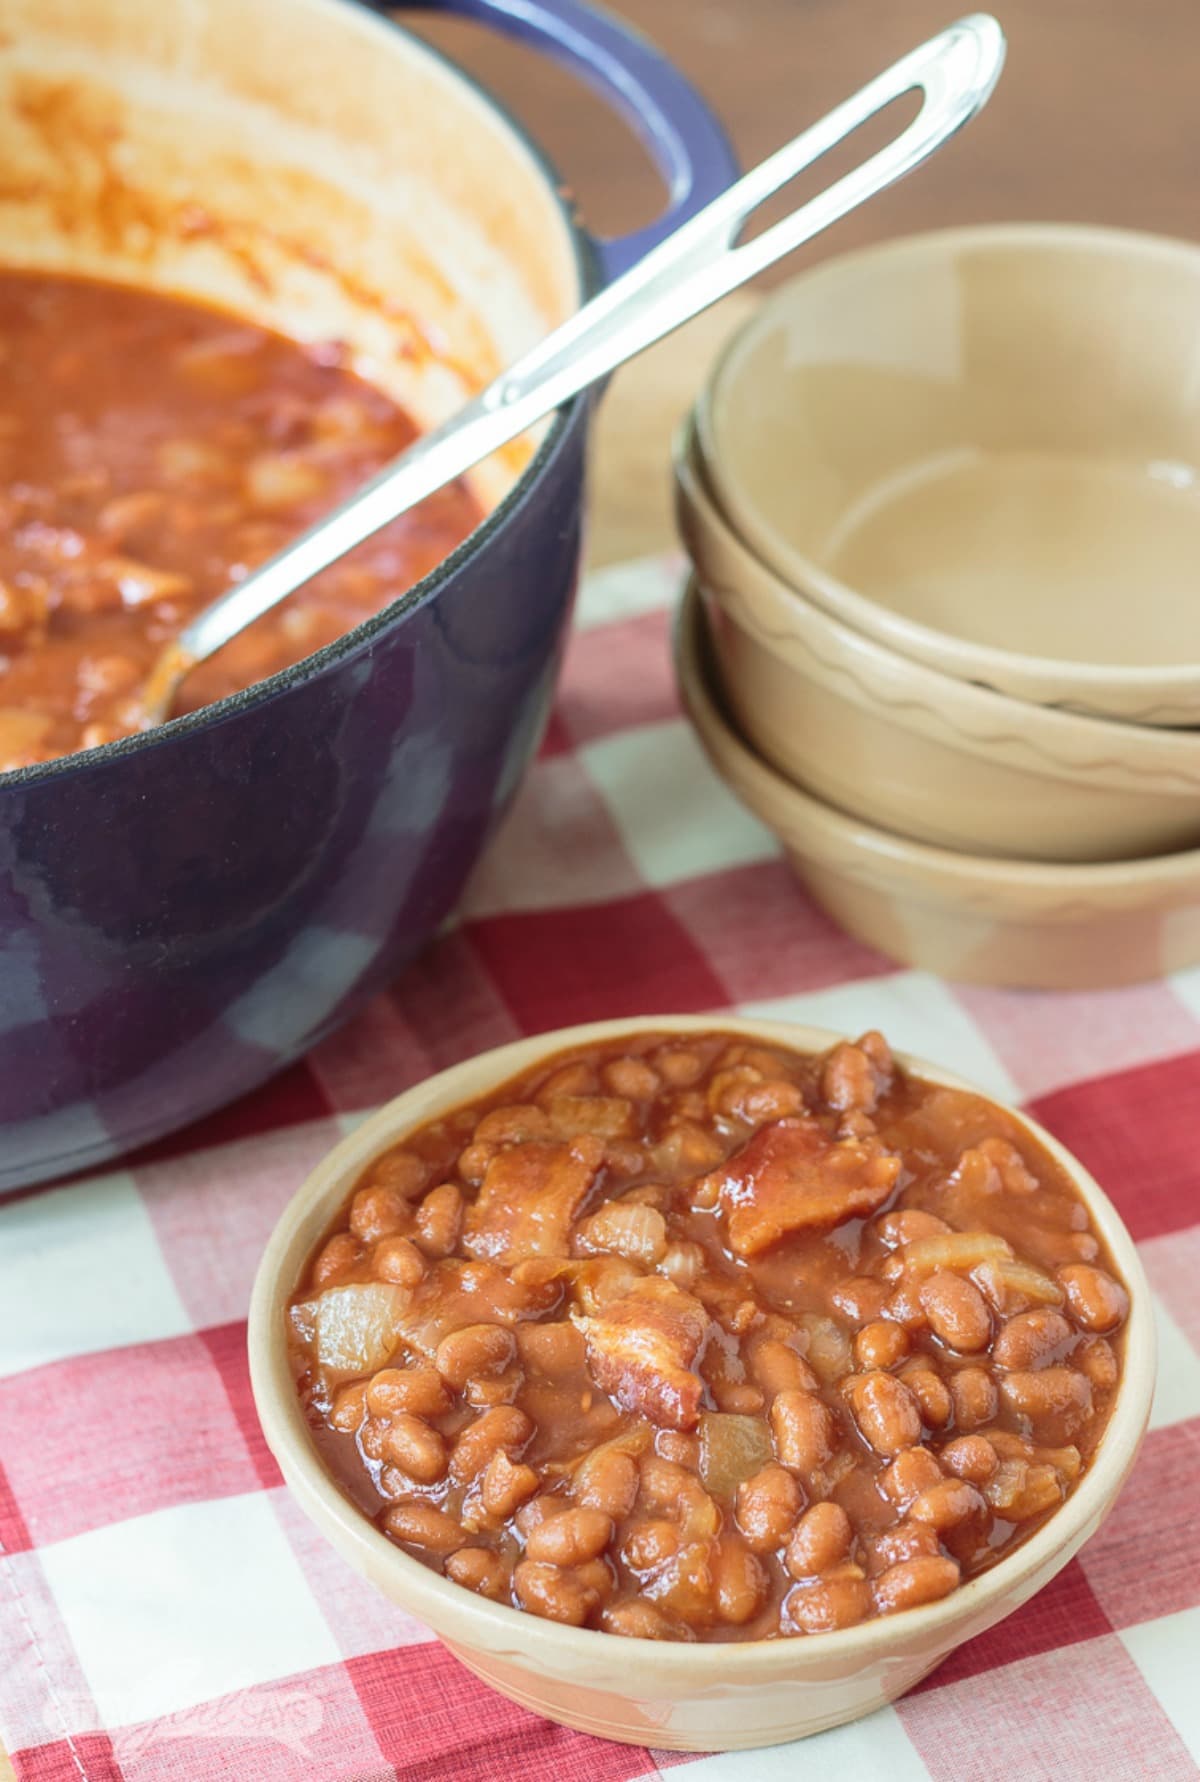 Southern Baked Beans Recipe with Bacon